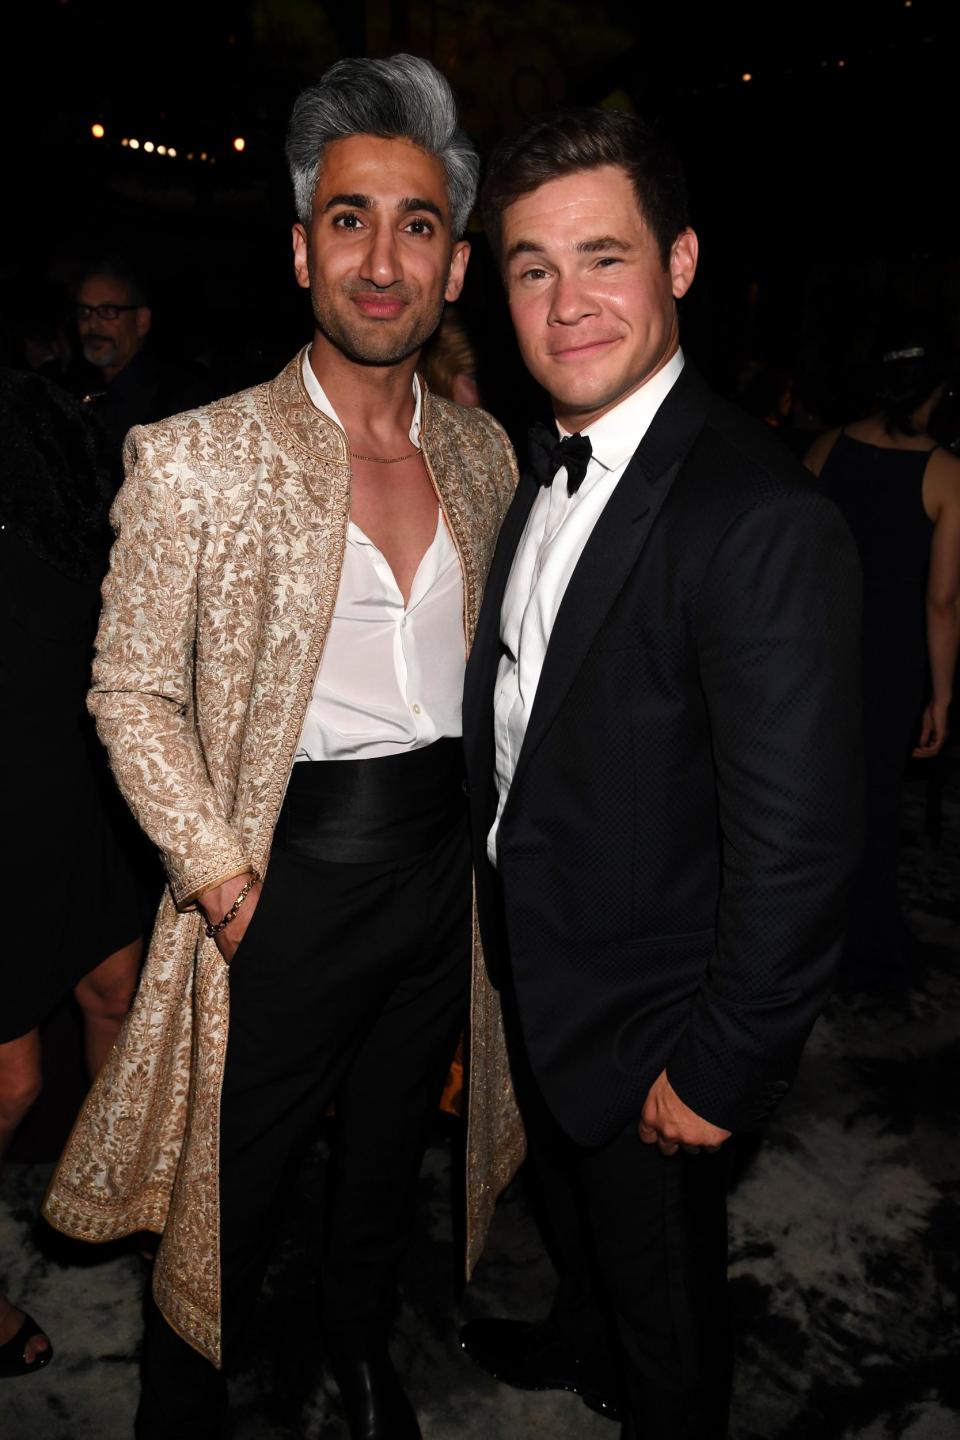 Tan France and Adam DeVine (Getty Images)